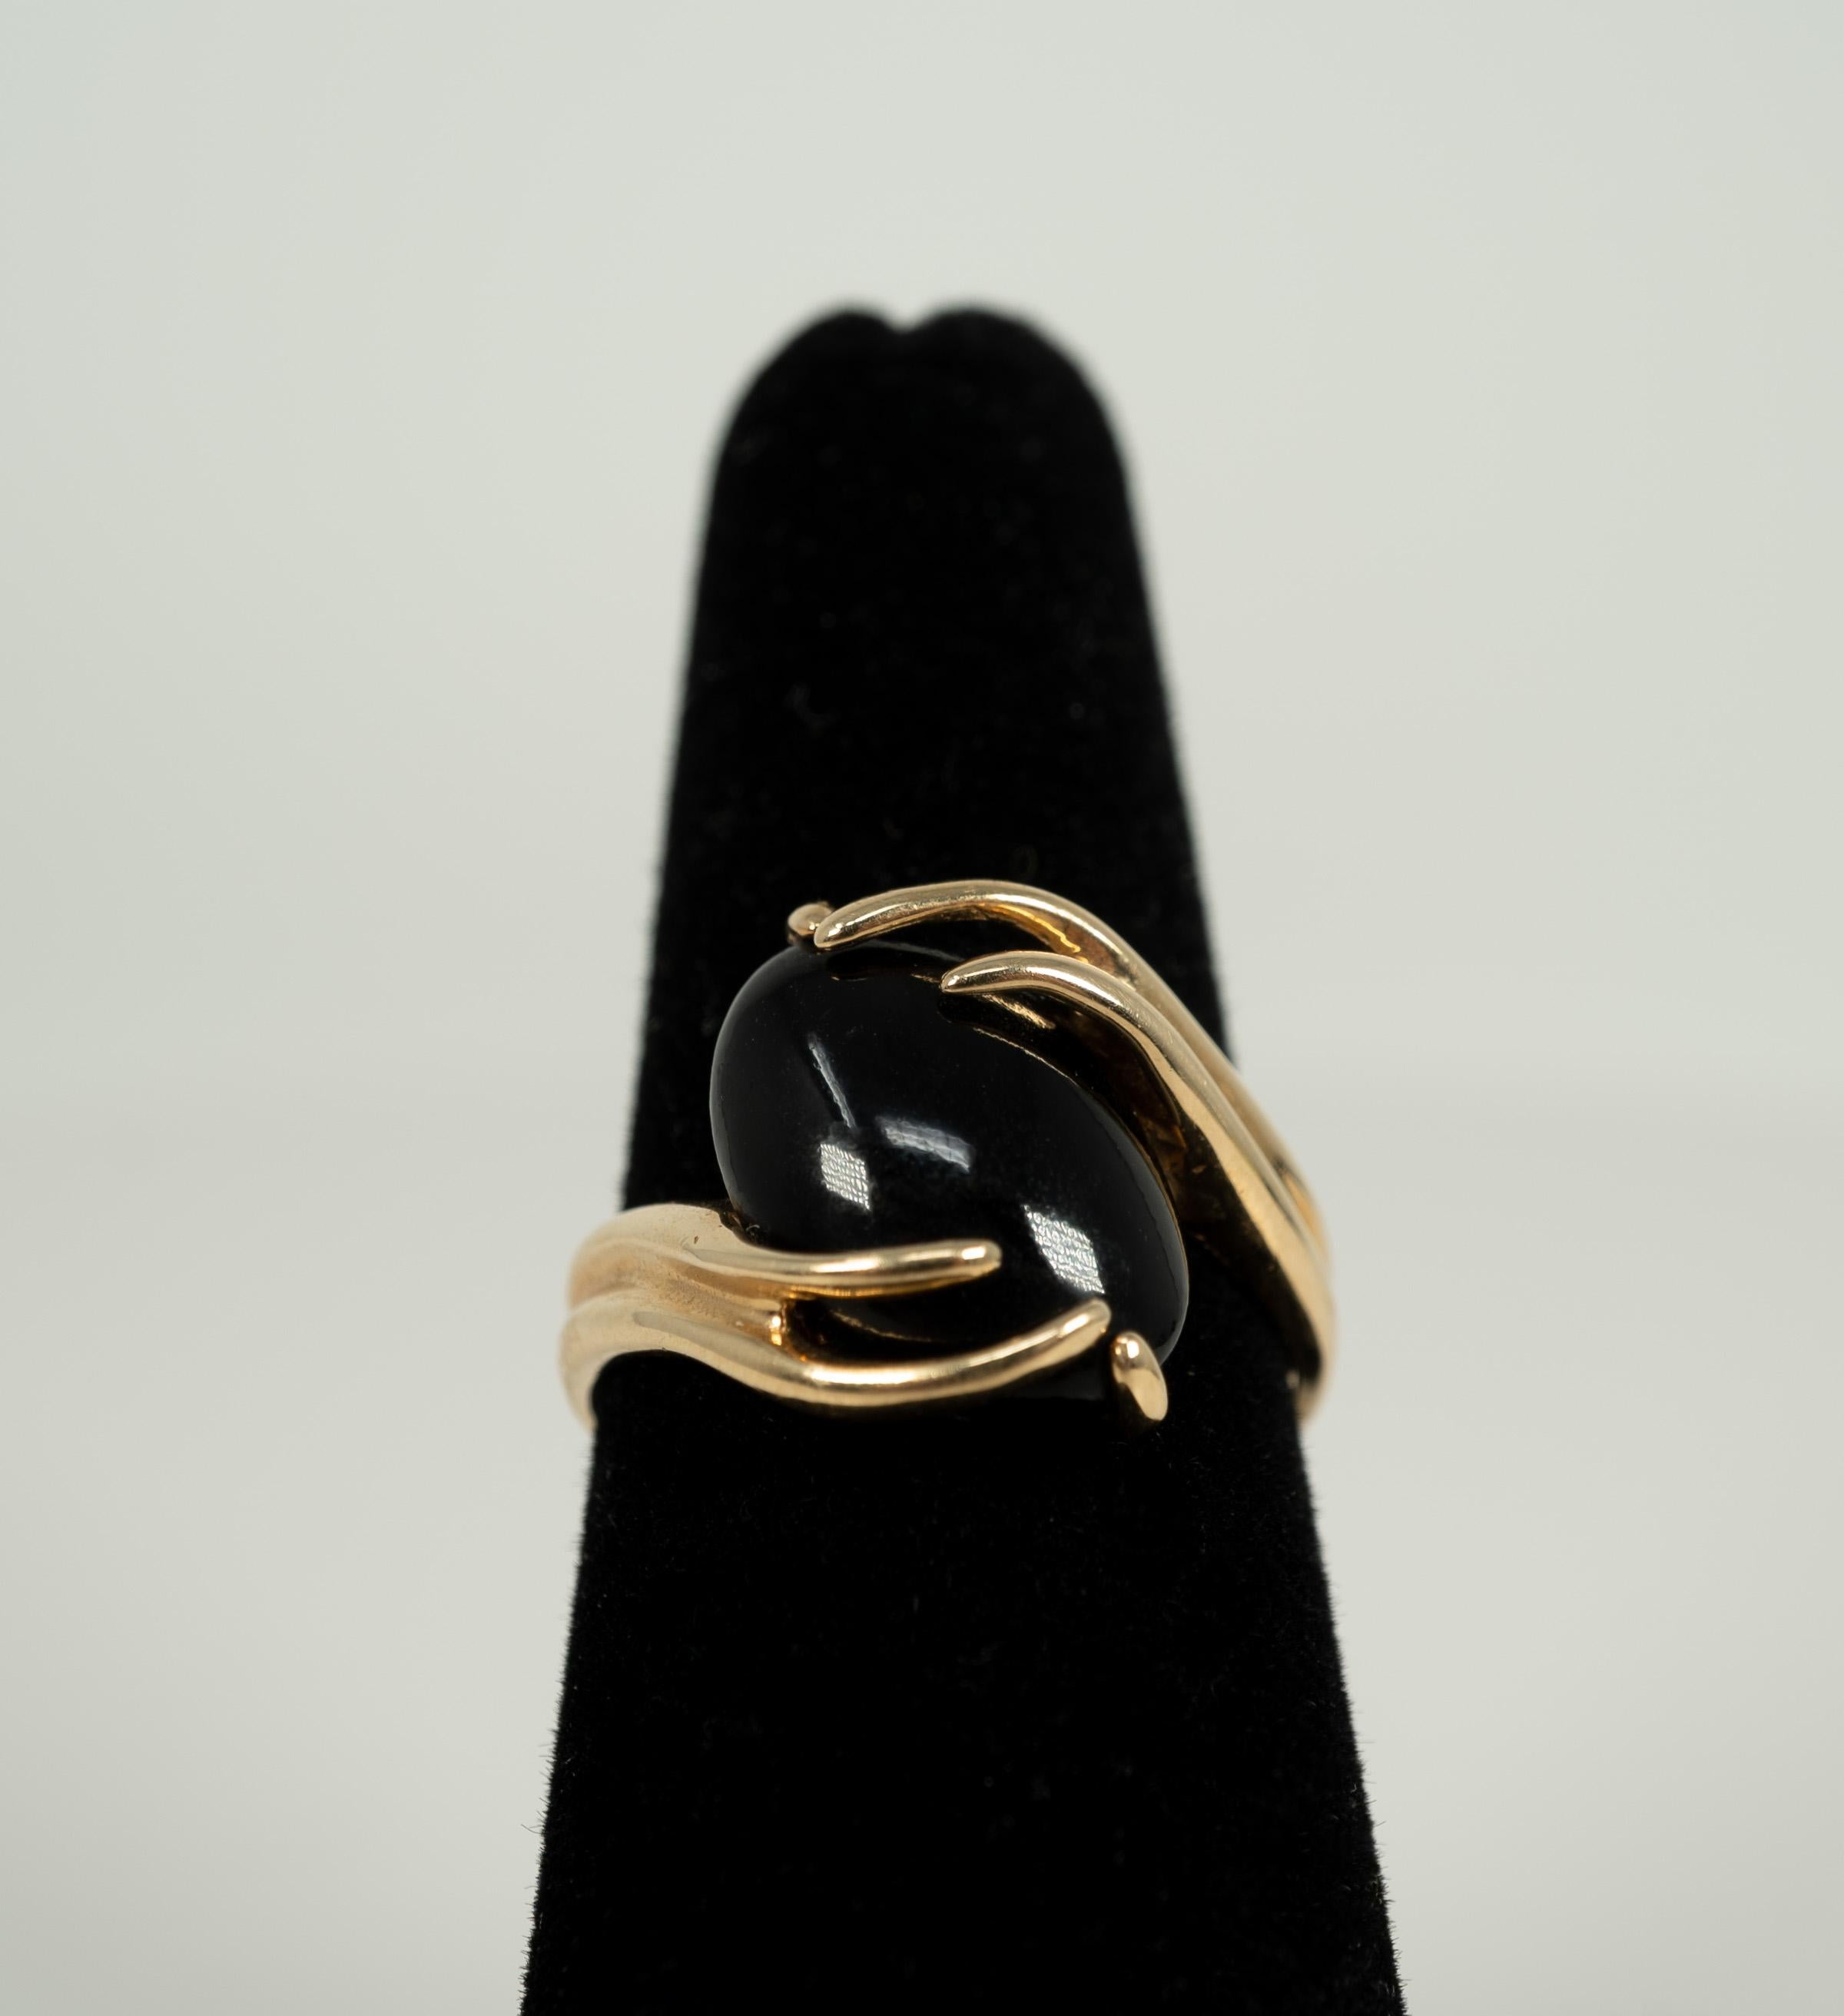 The glow of this oval-shaped, cabochon-cut black coral is lovely with the rich yellow gold mounting!